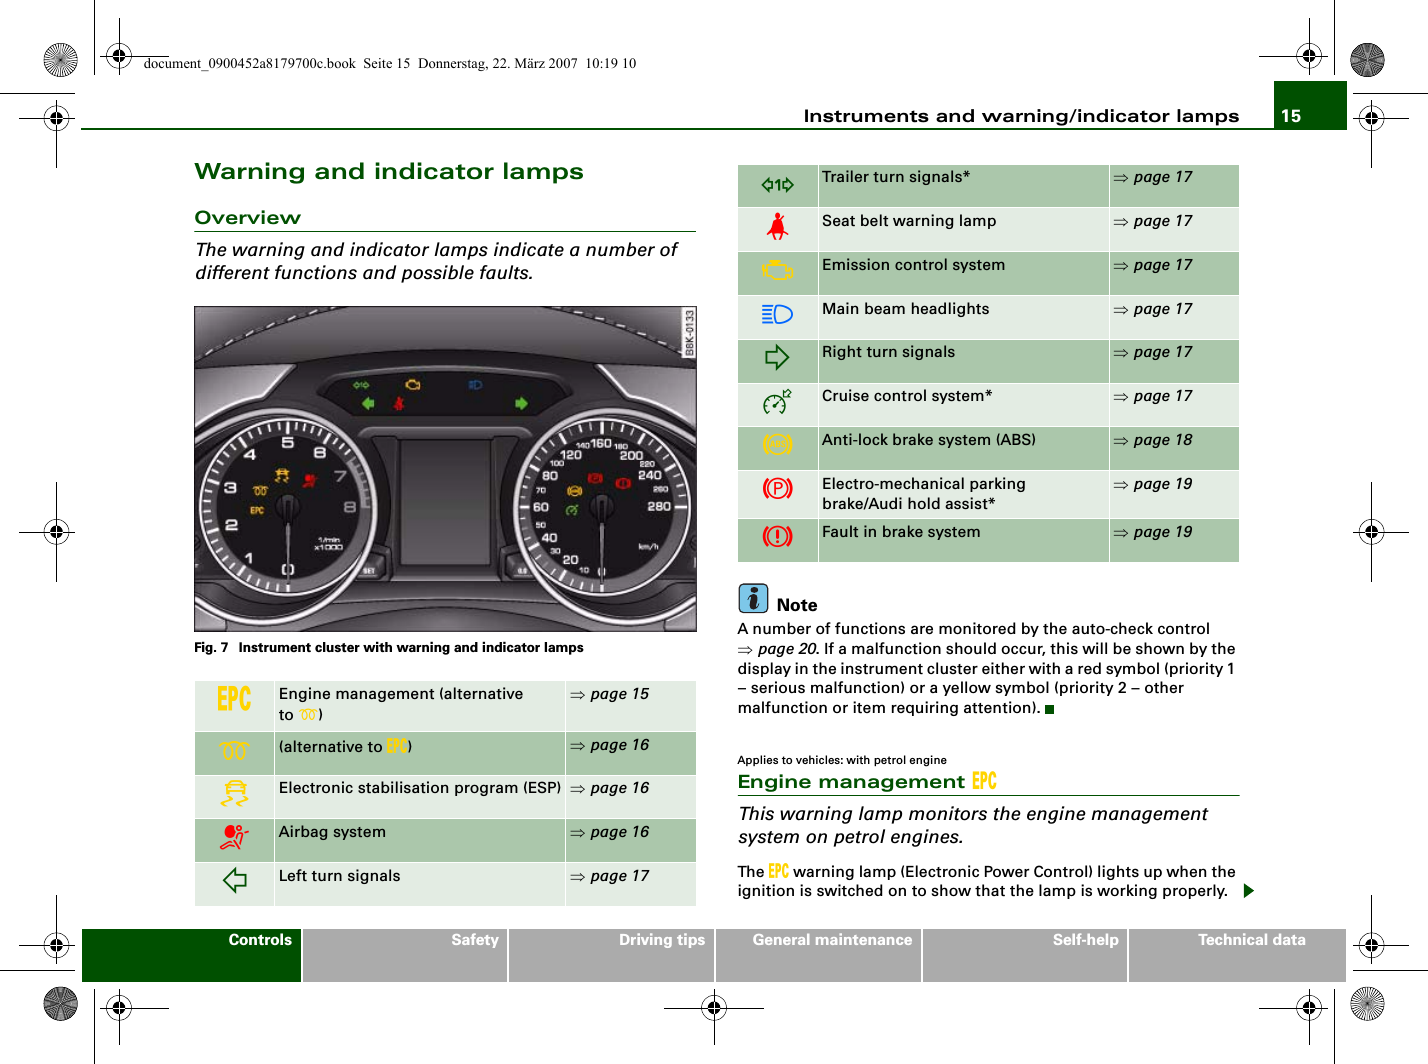 Instruments and warning/indicator lamps 15Controls Safety Driving tips General maintenance Self-help Technical dataWarning and indicator lampsOverviewThe warning and indicator lamps indicate a number of different functions and possible faults.Fig. 7  Instrument cluster with warning and indicator lampsNoteA number of functions are monitored by the auto-check control ⇒page 20. If a malfunction should occur, this will be shown by the display in the instrument cluster either with a red symbol (priority 1 – serious malfunction) or a yellow symbol (priority 2 – other malfunction or item requiring attention).Applies to vehicles: with petrol engineEngine management This warning lamp monitors the engine management system on petrol engines.The  warning lamp (Electronic Power Control) lights up when the ignition is switched on to show that the lamp is working properly. Engine management (alternative to )⇒page 15(alternative to )⇒page 16Electronic stabilisation program (ESP) ⇒page 16Airbag system ⇒page 16Left turn signals ⇒page 17Trailer turn signals* ⇒page 17Seat belt warning lamp ⇒page 17Emission control system ⇒page 17Main beam headlights ⇒page 17Right turn signals ⇒page 17Cruise control system* ⇒page 17Anti-lock brake system (ABS) ⇒page 18Electro-mechanical parking brake/Audi hold assist*⇒page 19Fault in brake system ⇒page 19document_0900452a8179700c.book  Seite 15  Donnerstag, 22. März 2007  10:19 10